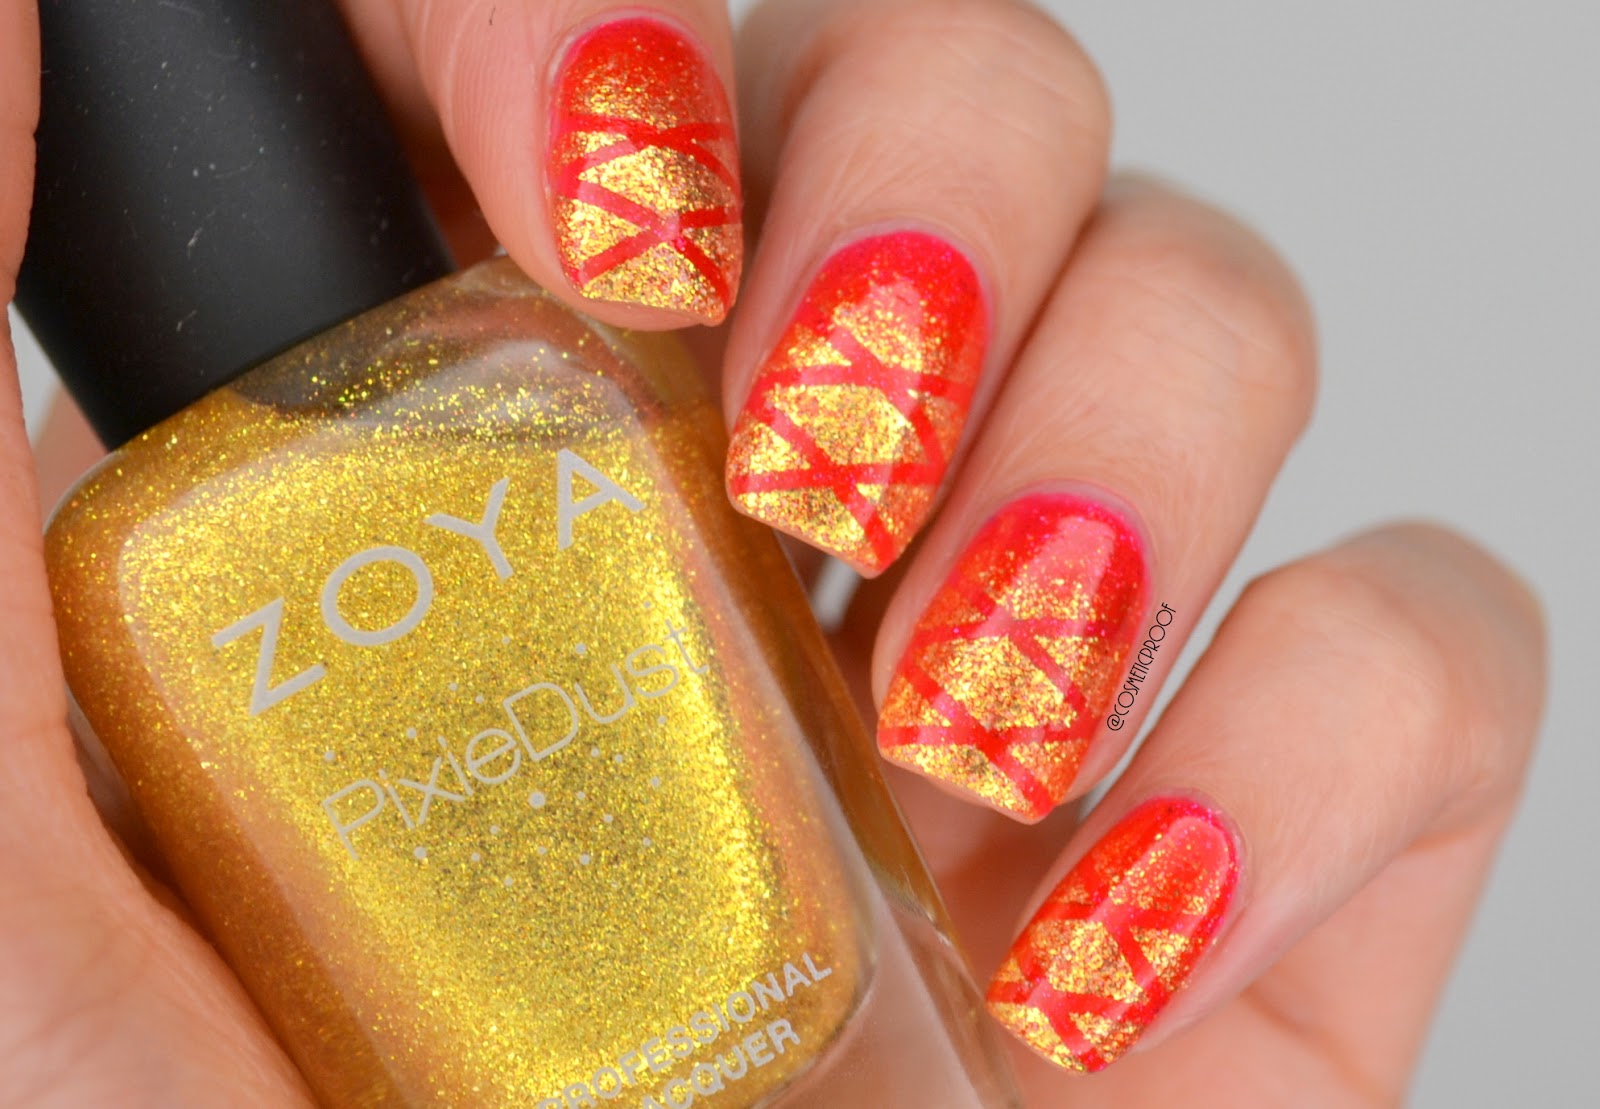 5. Gradient Nail Art with Yellow Polish - wide 1